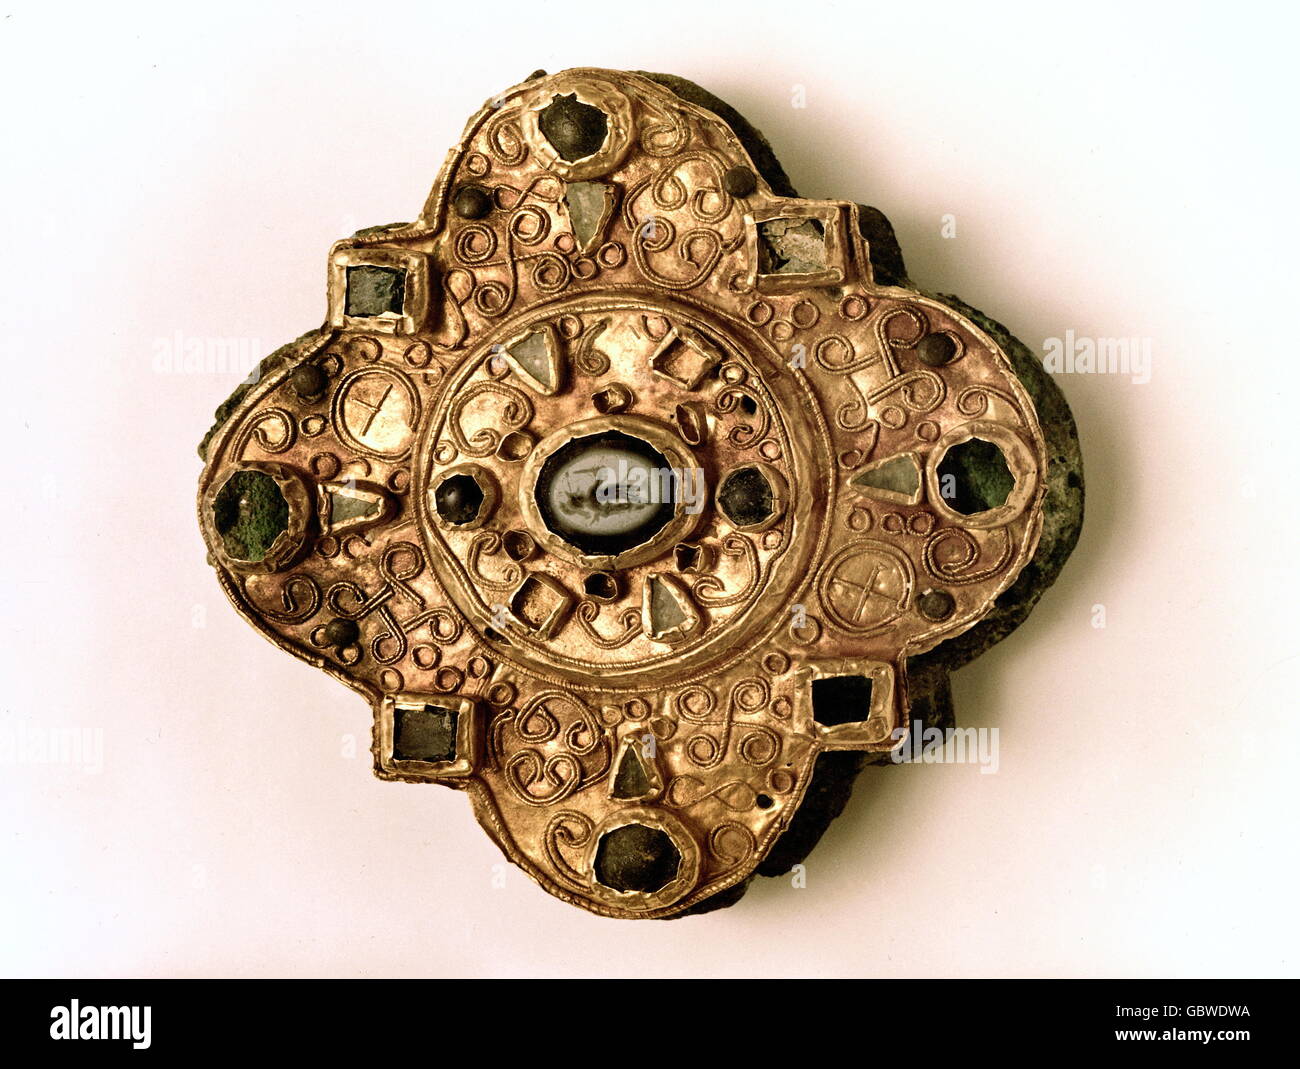 jewellery, Middle Ages, Frankish gold fibula from Kobern, Germany, 7th century, Roman-Germanic Museum, Cologne, brooch, Francia, Frankia, golden, gem, gemstone, gems, gemstones, historic, historical, piece of jewellery, medieval, Additional-Rights-Clearences-Not Available Stock Photo